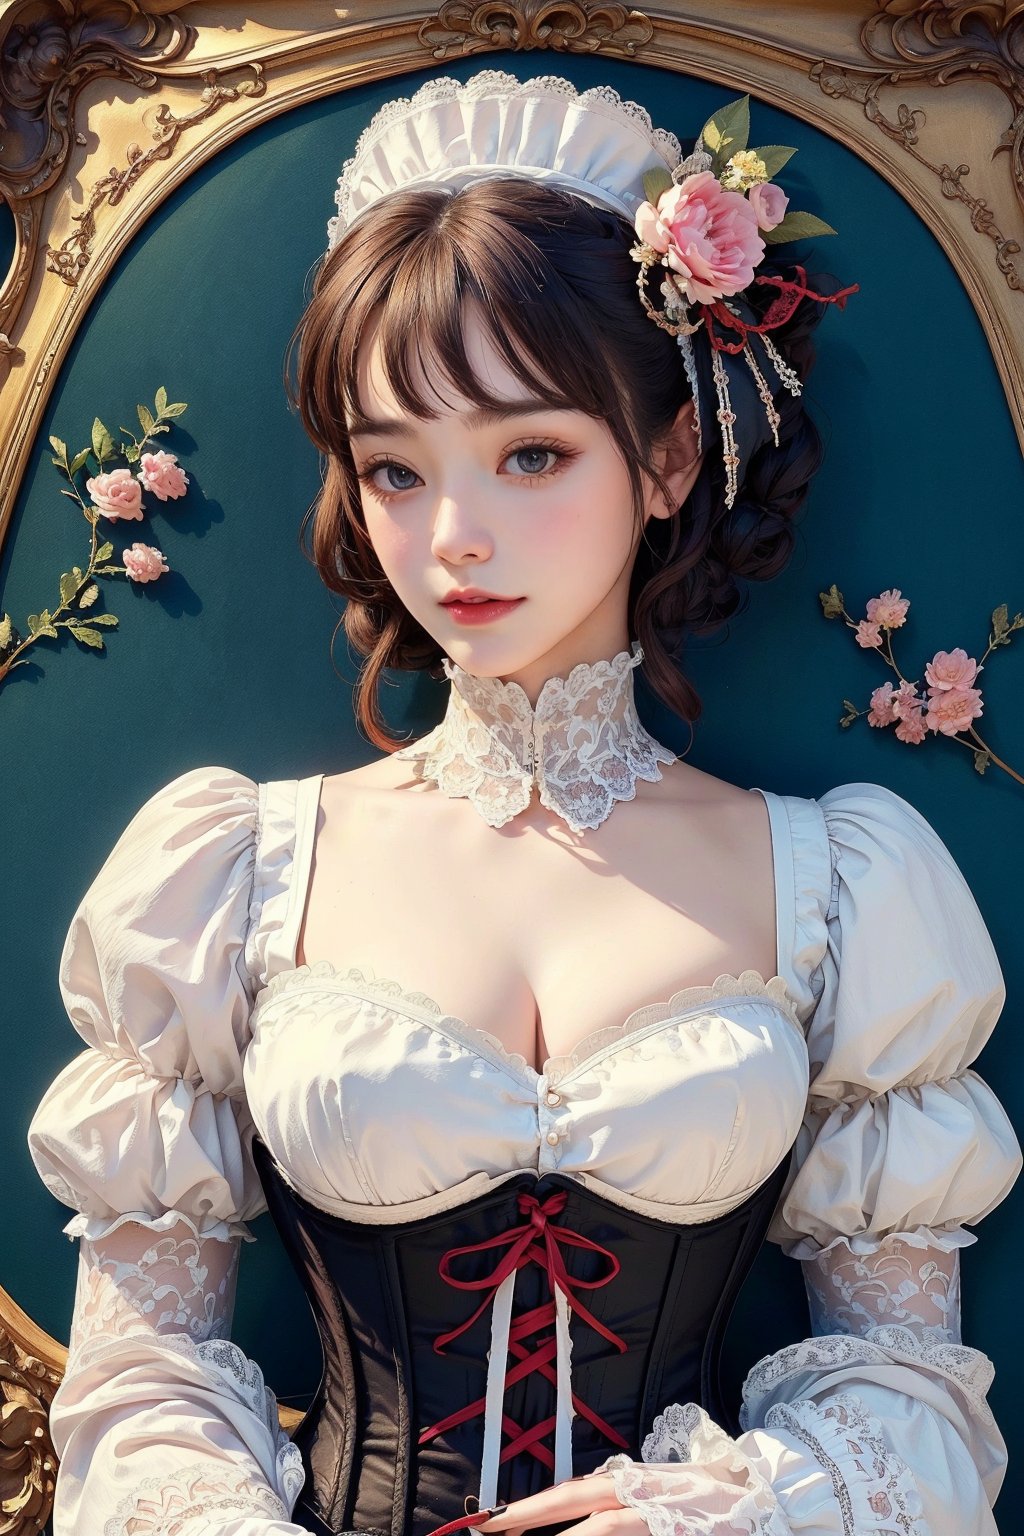 busty and sexy girl, 8k, masterpiece, ultra-realistic, best quality, high resolution, high definition, Lolita, maid, Victorian fashion, Rococo fashion, black corset with red ribbon lacing, White lace details on the sleeves, Puffed sleeves, headpiece adorned with flowers, ornate flower frame background, historical vibe, historical fashion with fantasy elements,lolita